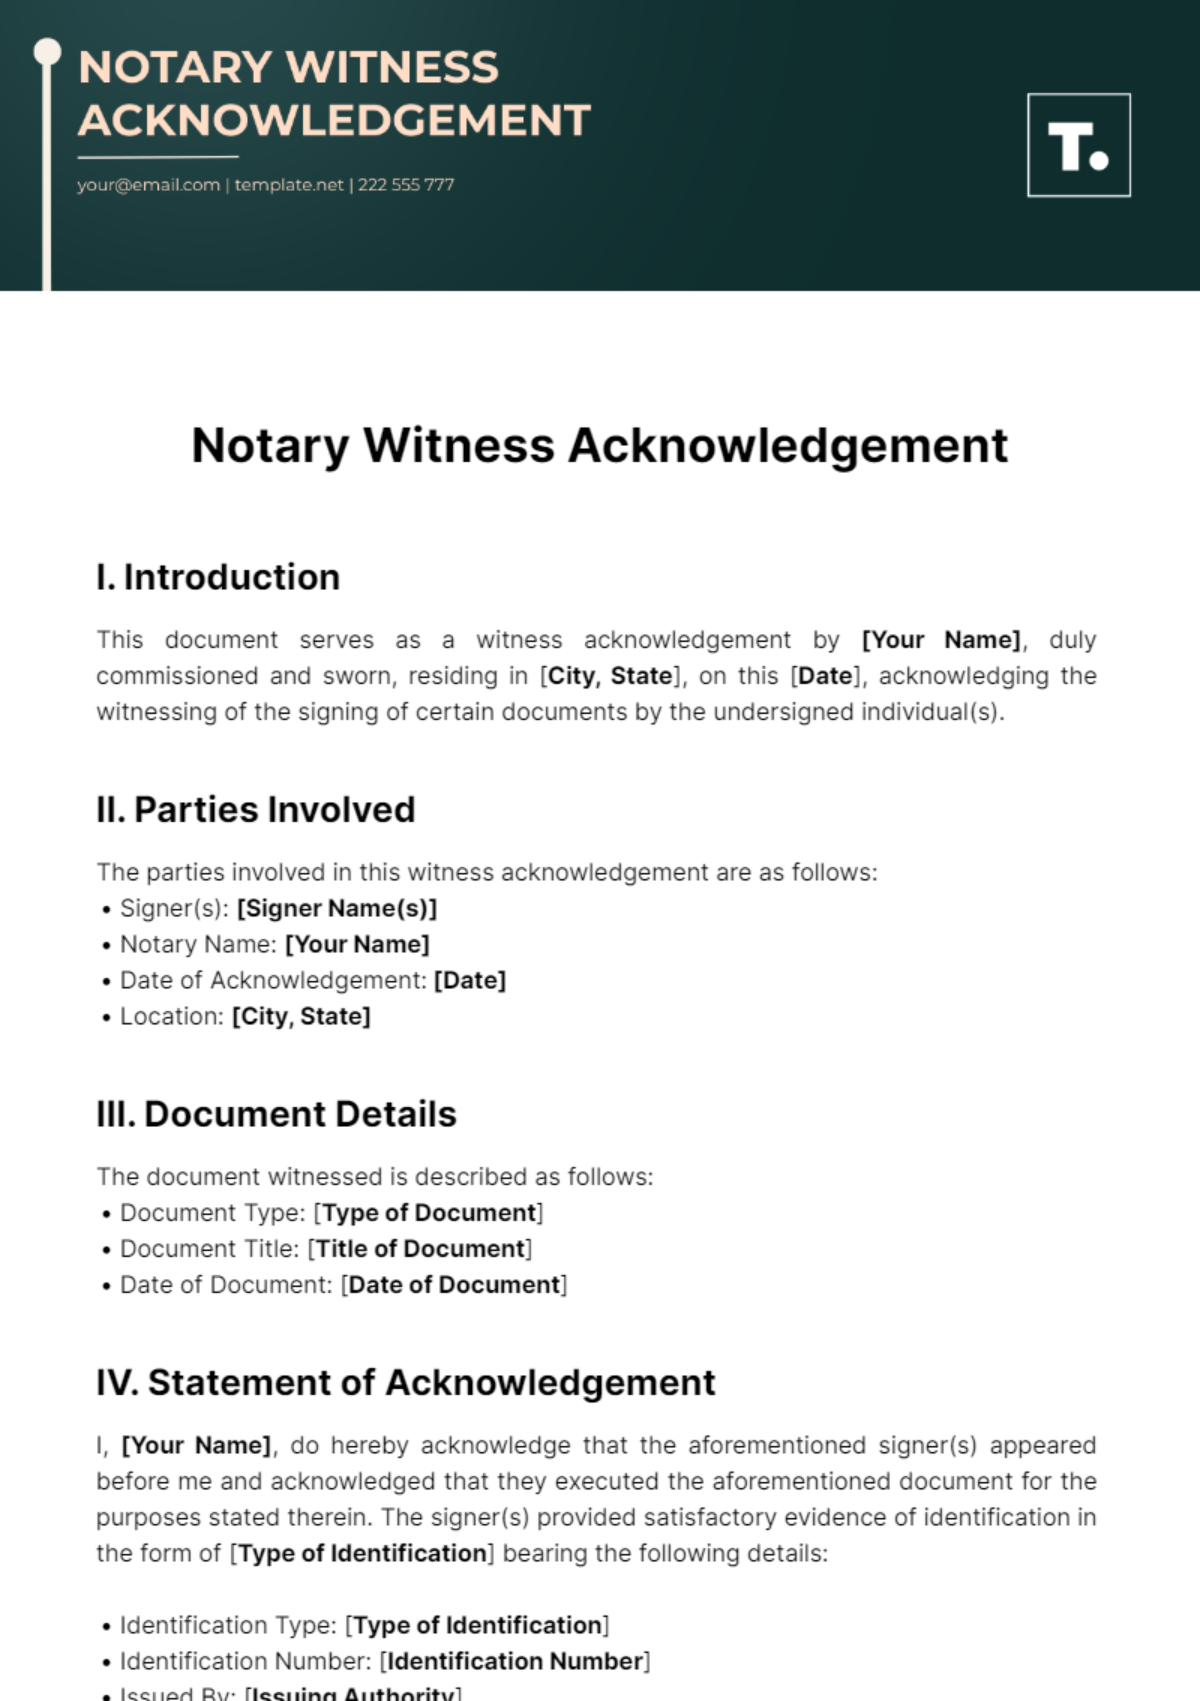 Free Notary Witness Acknowledgement Template